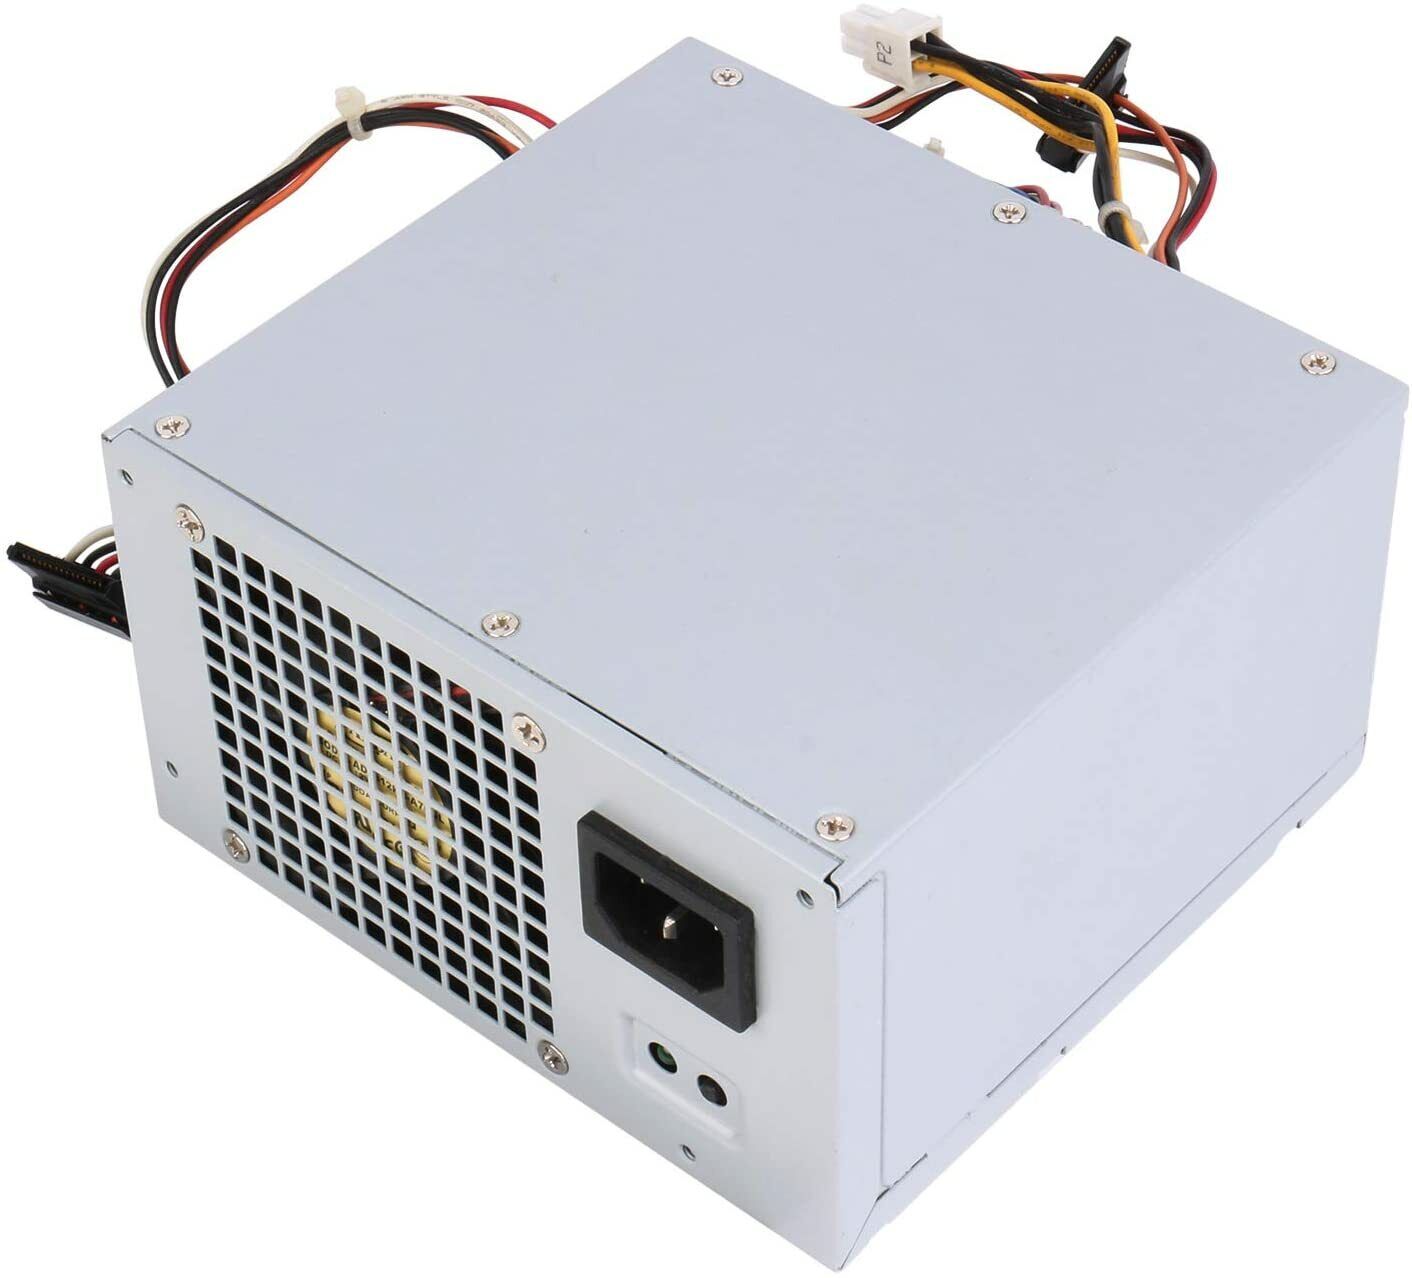 L300NM-01 Power Supply 300W - For Dell Inspiron 3847 MT PS-6301-06D G9MTY 0G9MTY